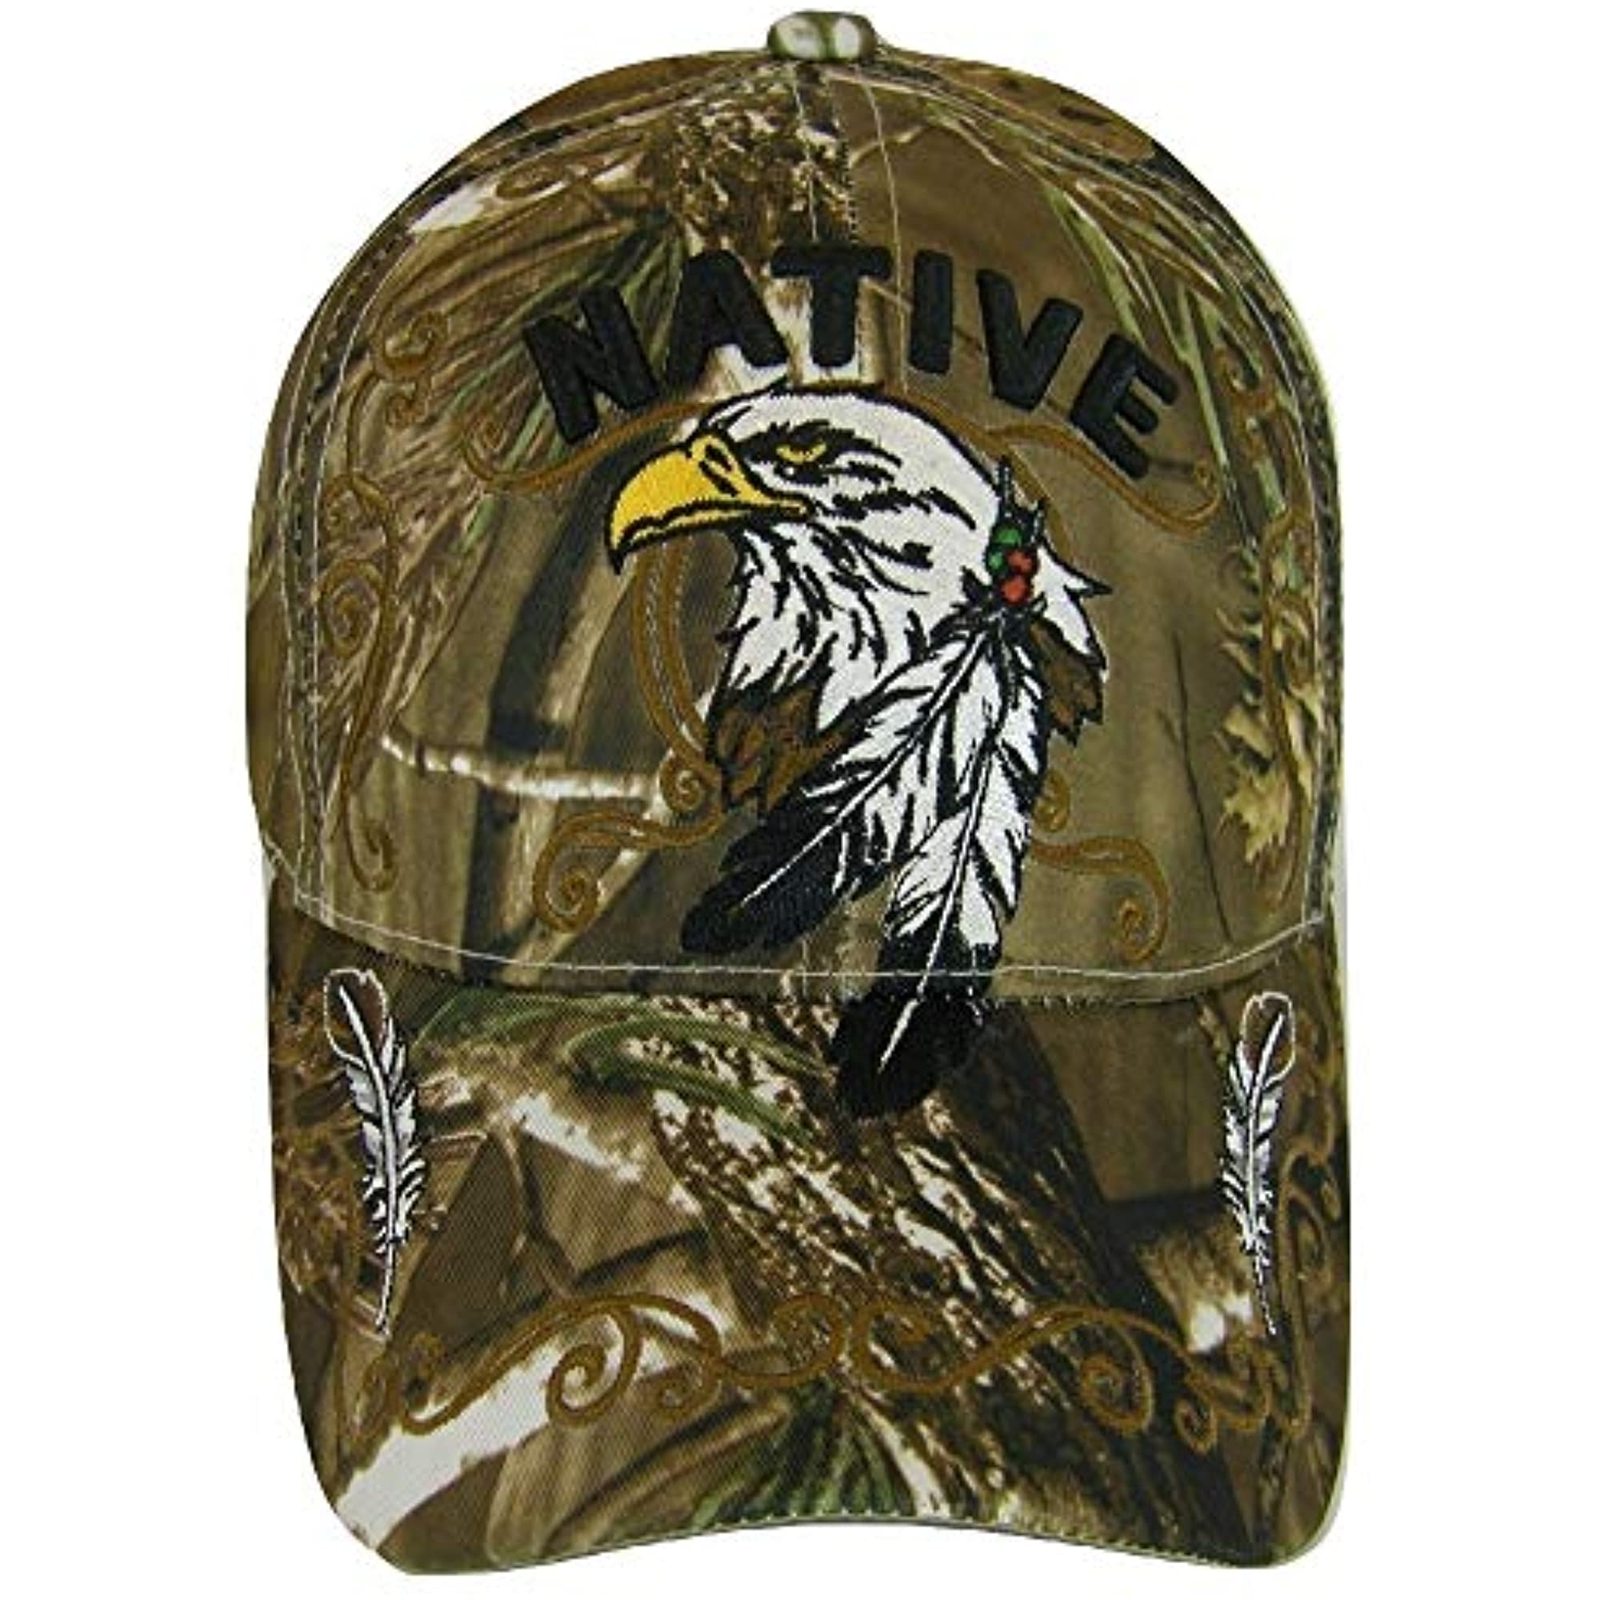 Native Pride Eagle Adjustable Baseball Cap with Feathers and Swirls (Hunting Cam